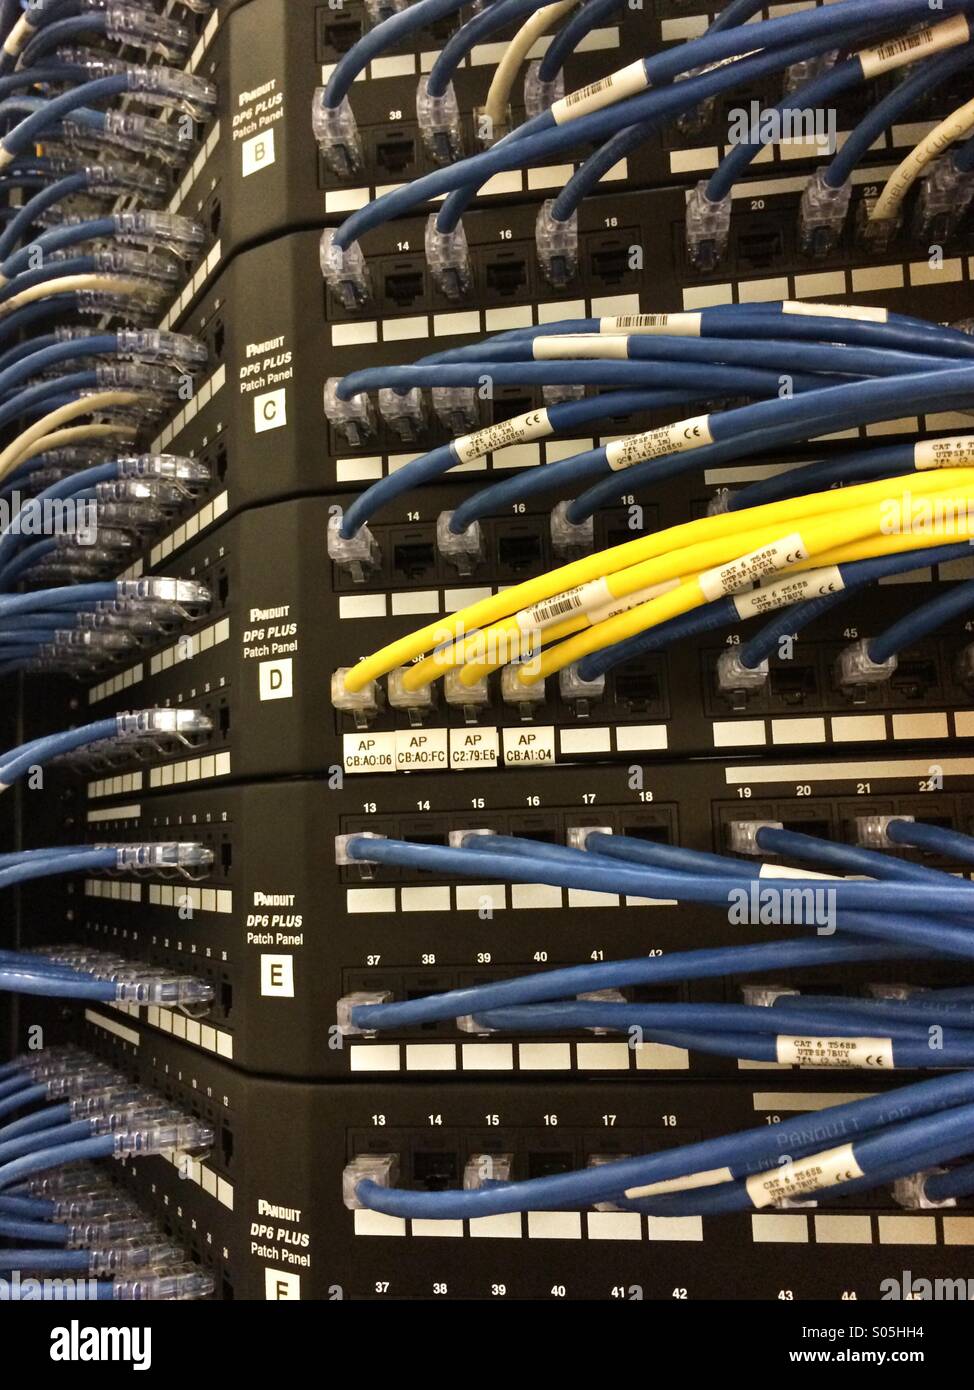 Ethernet cables are plugged into a server rack Stock Photo